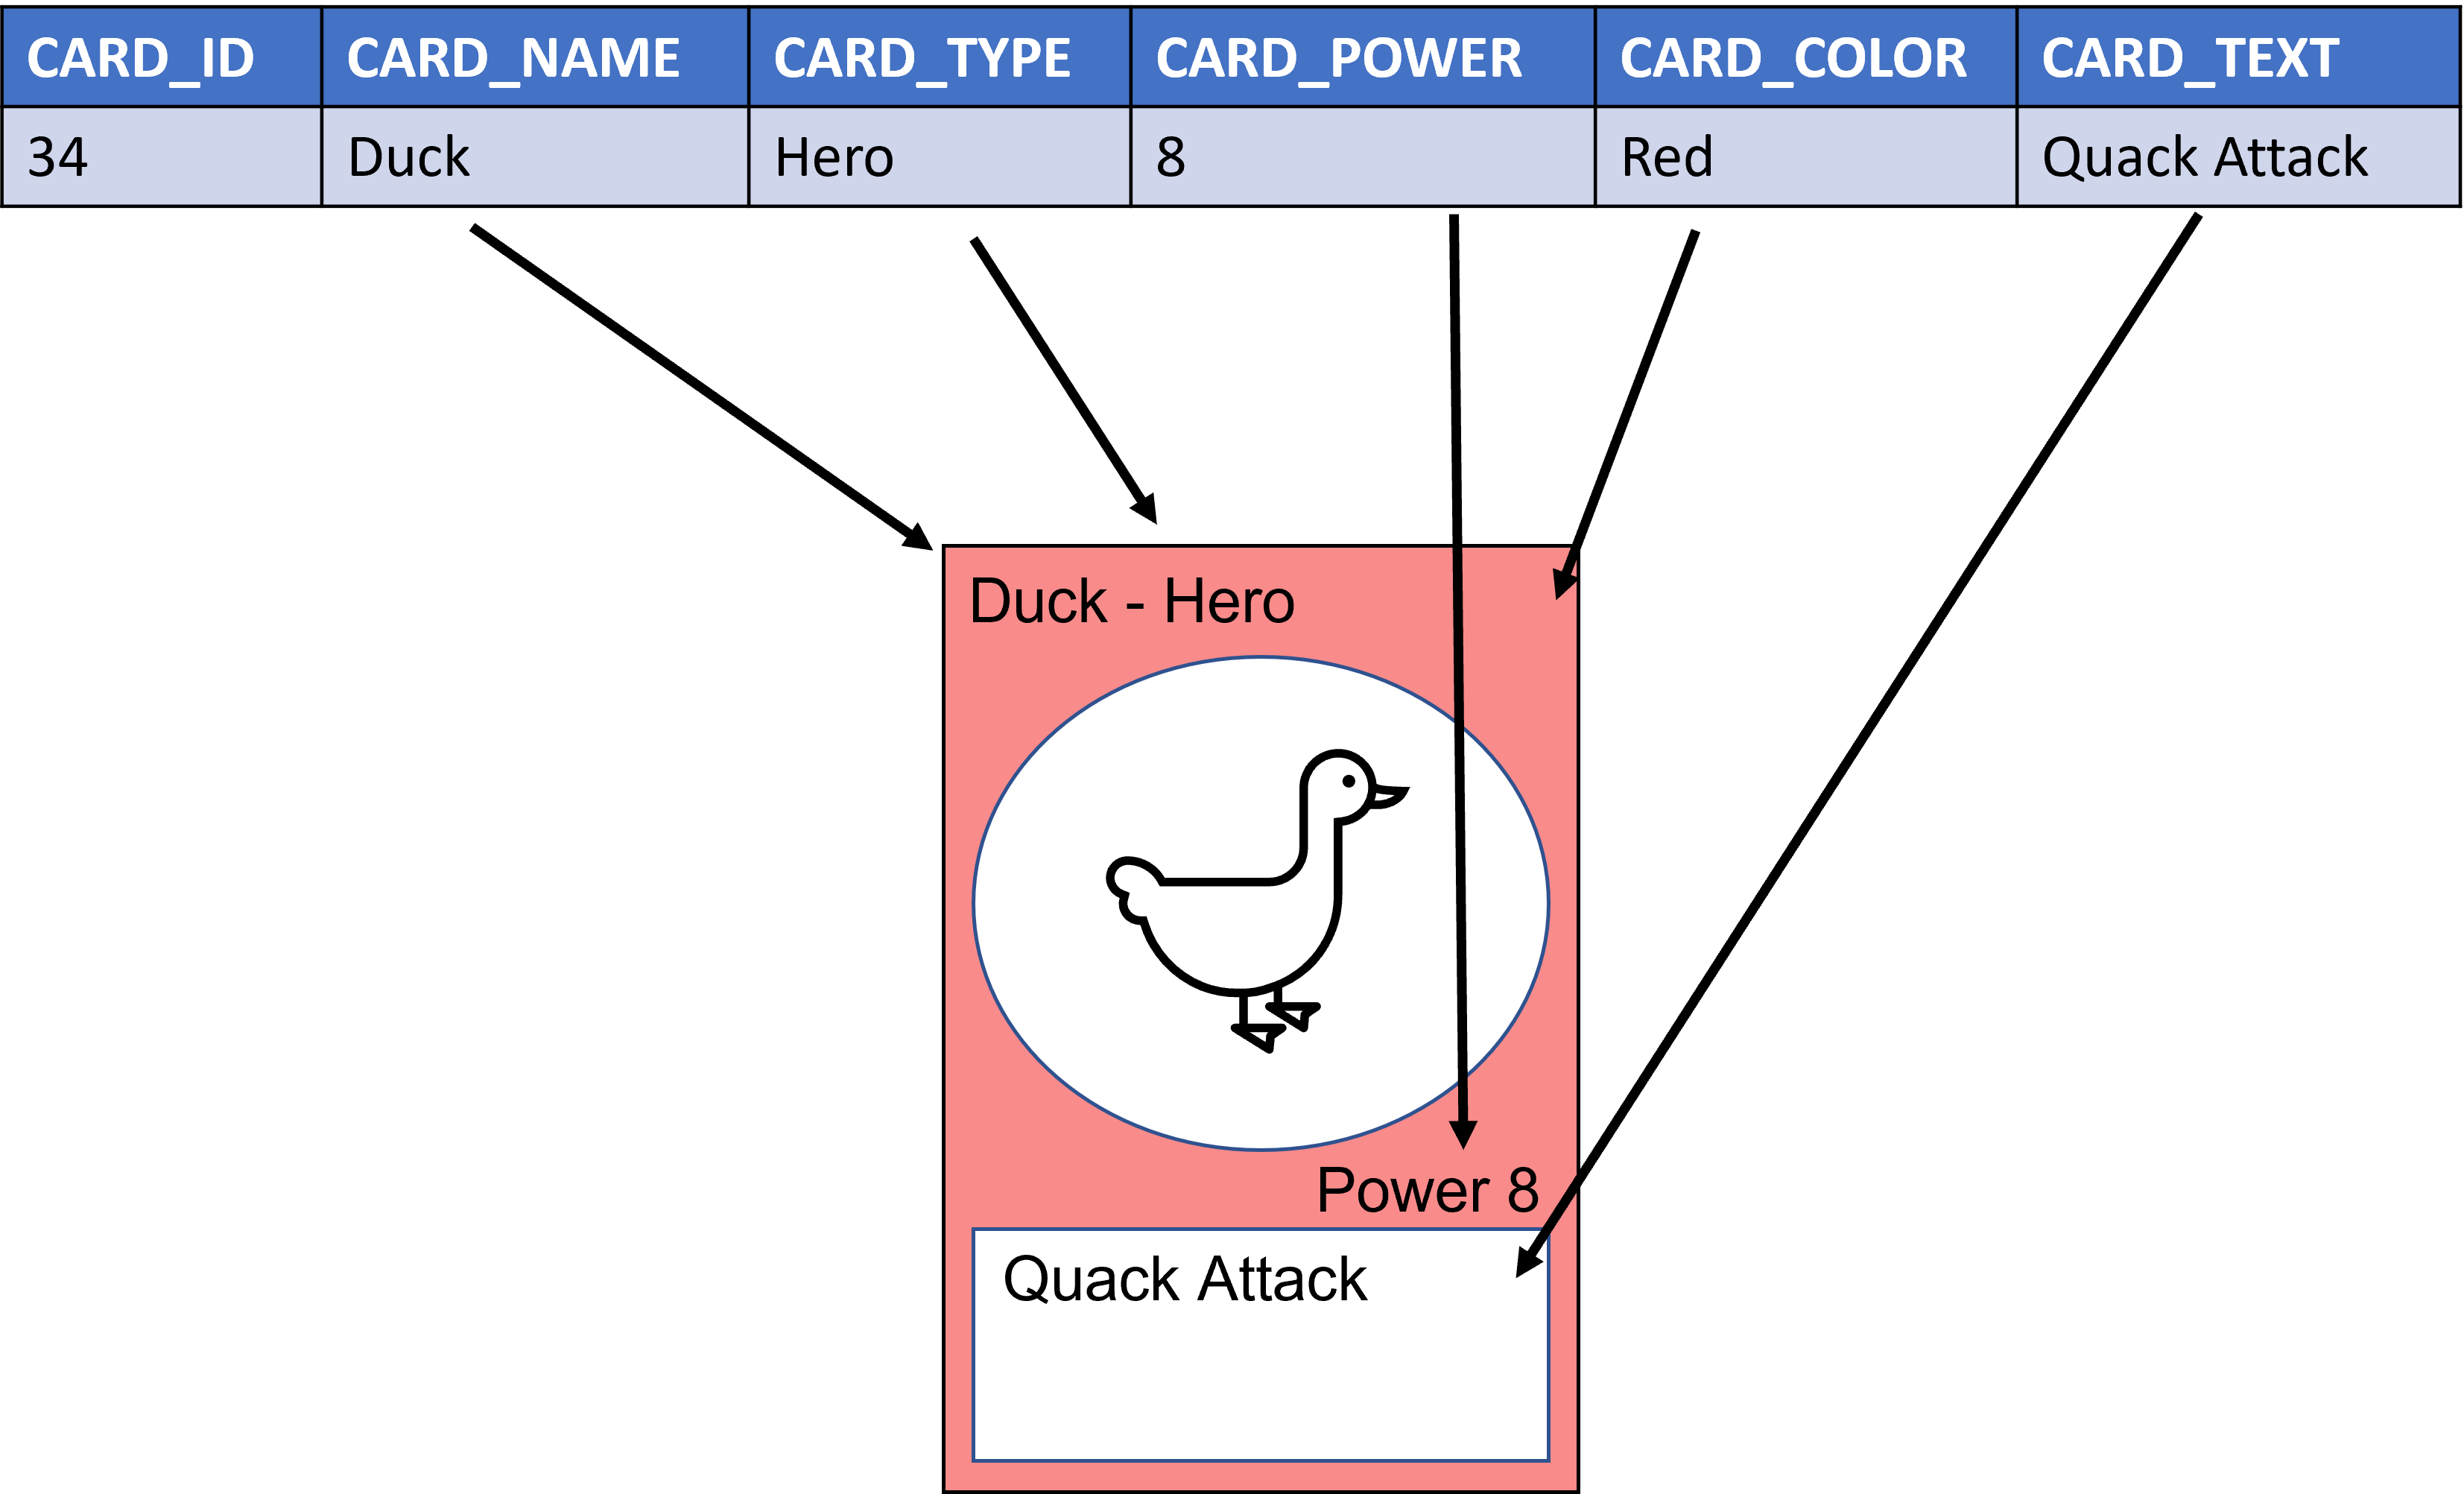 Diagram showing how the columns of the cards table relates to the physical playing card of the scenario.